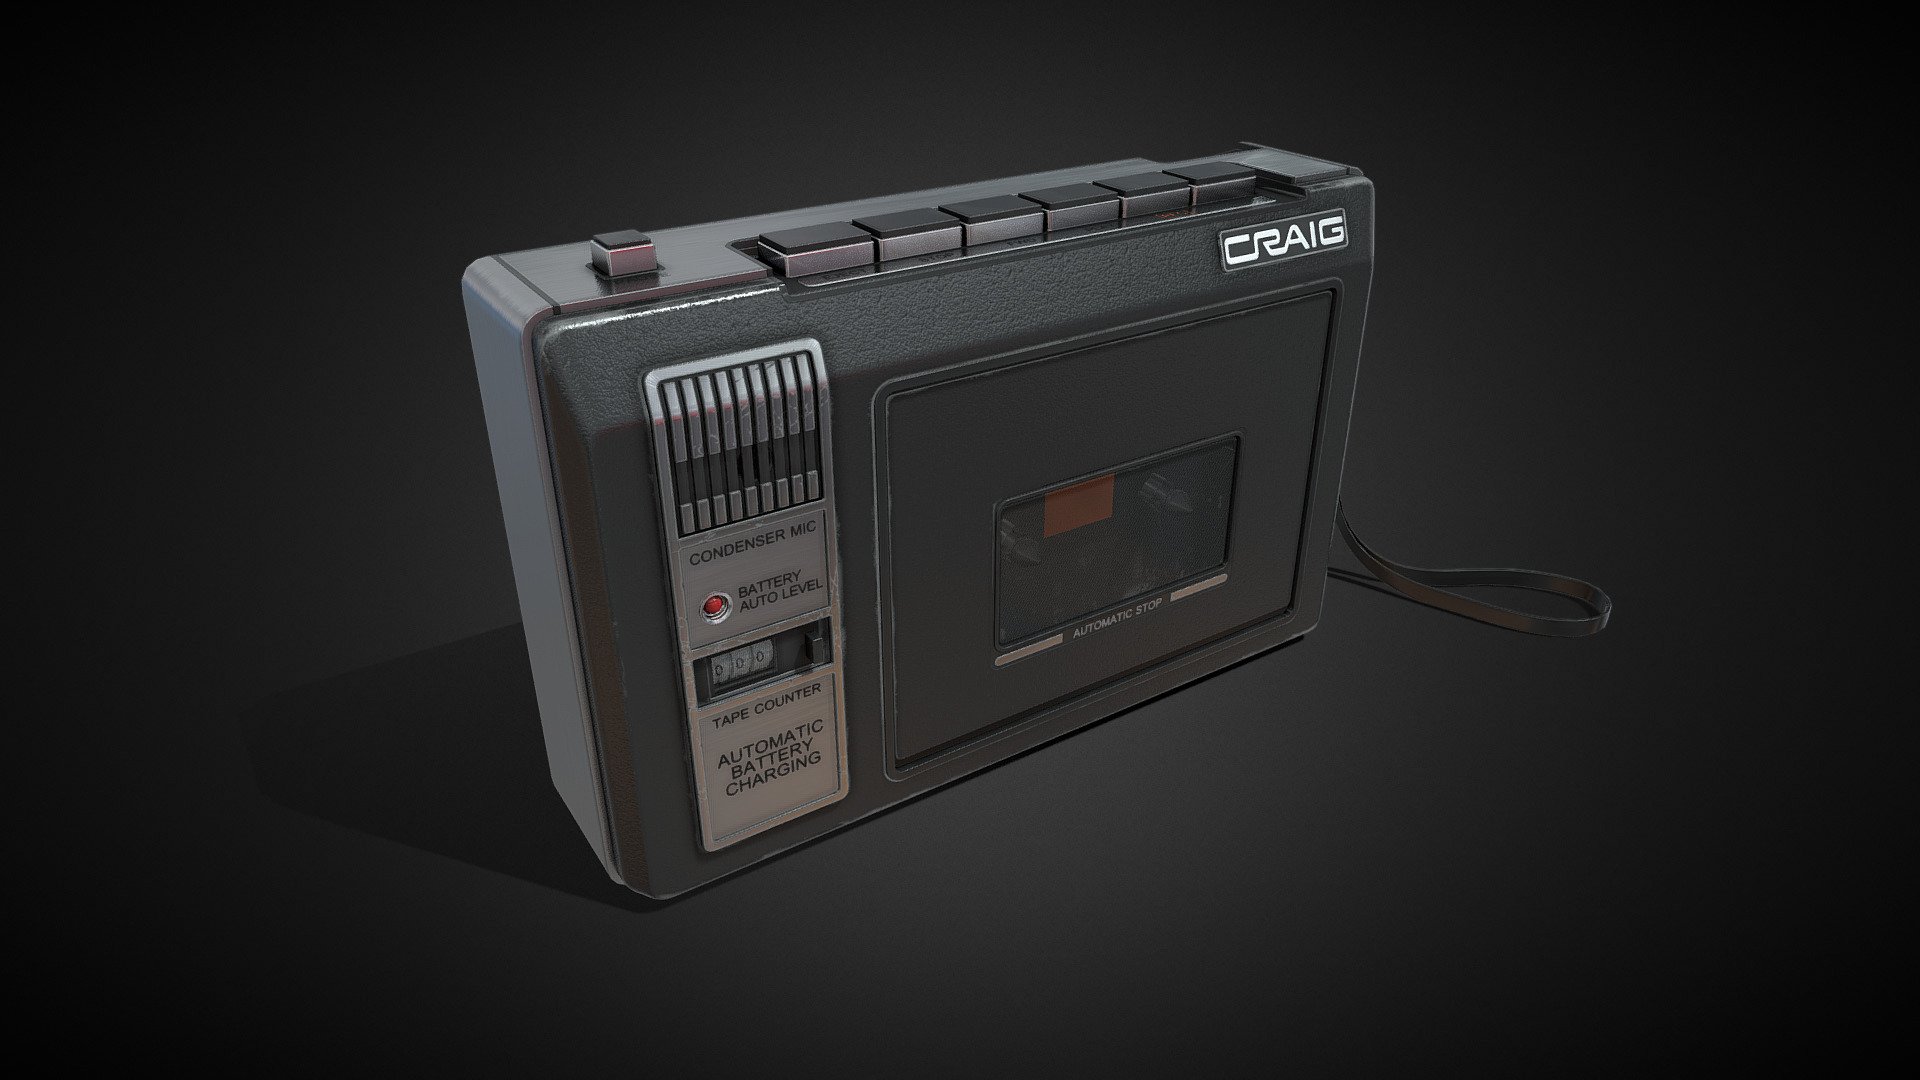 The is a real-time version of the Craig 2629 Handheld Cassette Player/Recorder. It can be used in any real-time environment 3d model